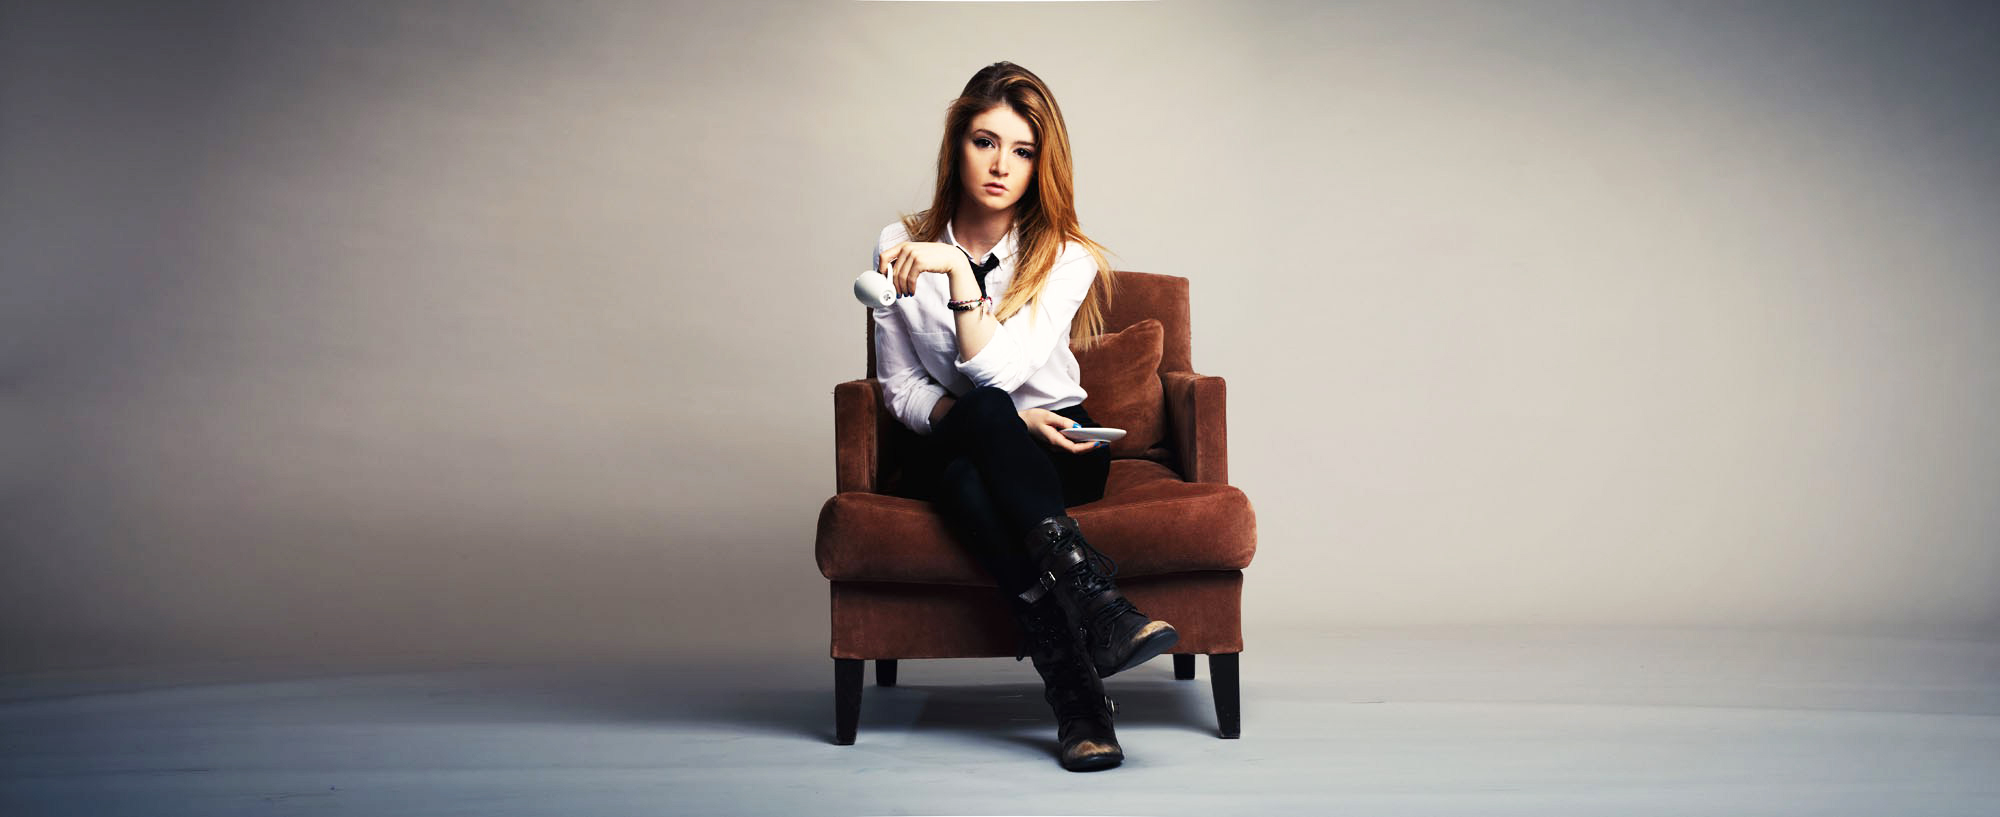 Awesome Chrissy Costanza Wallpaper Full HD Pictures